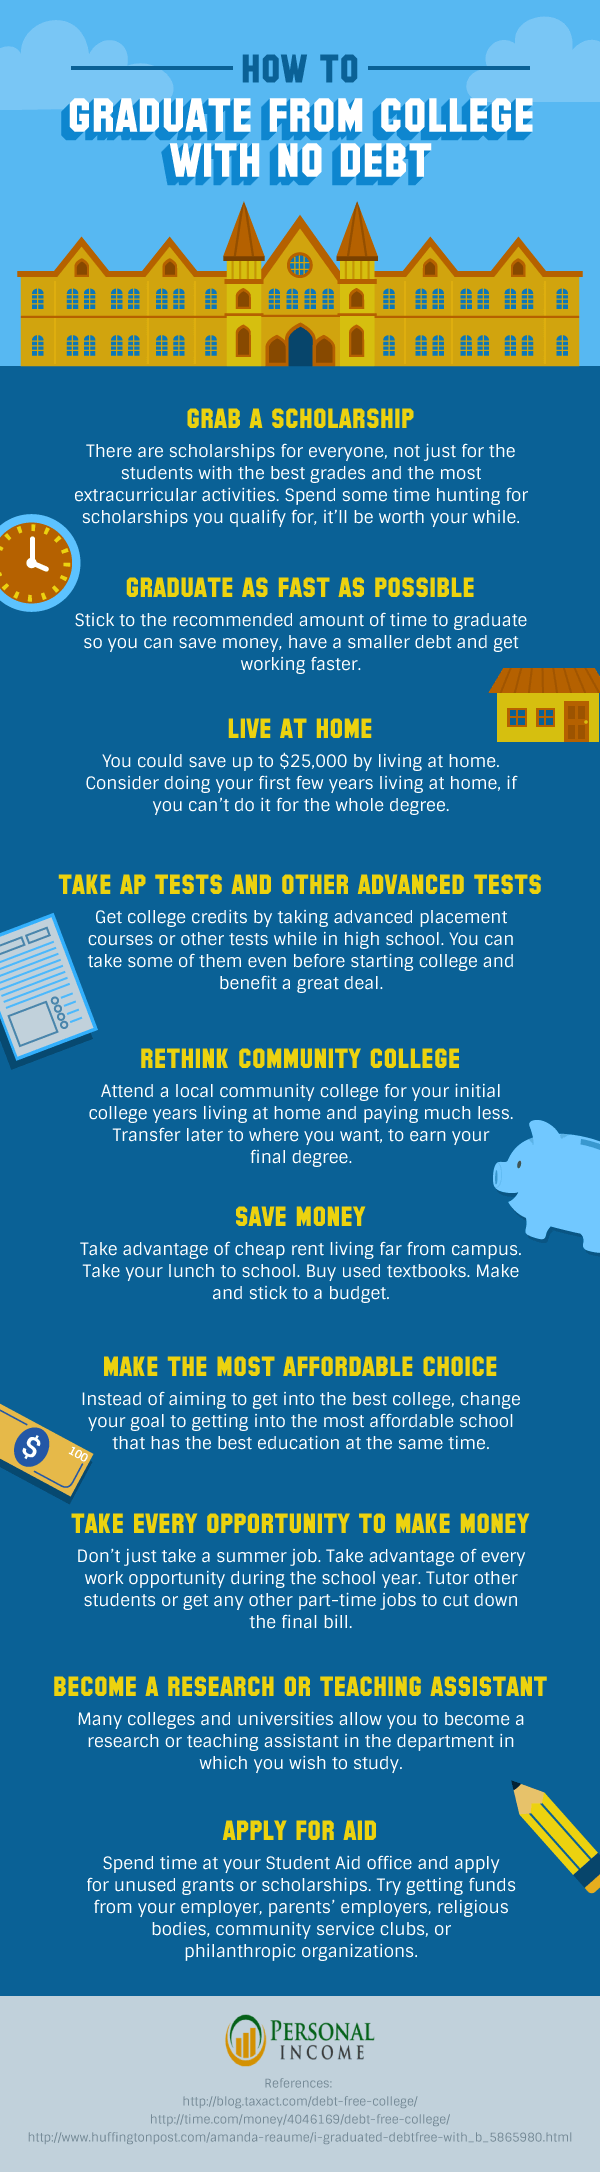 An infographic on how to graduate from college with no debt